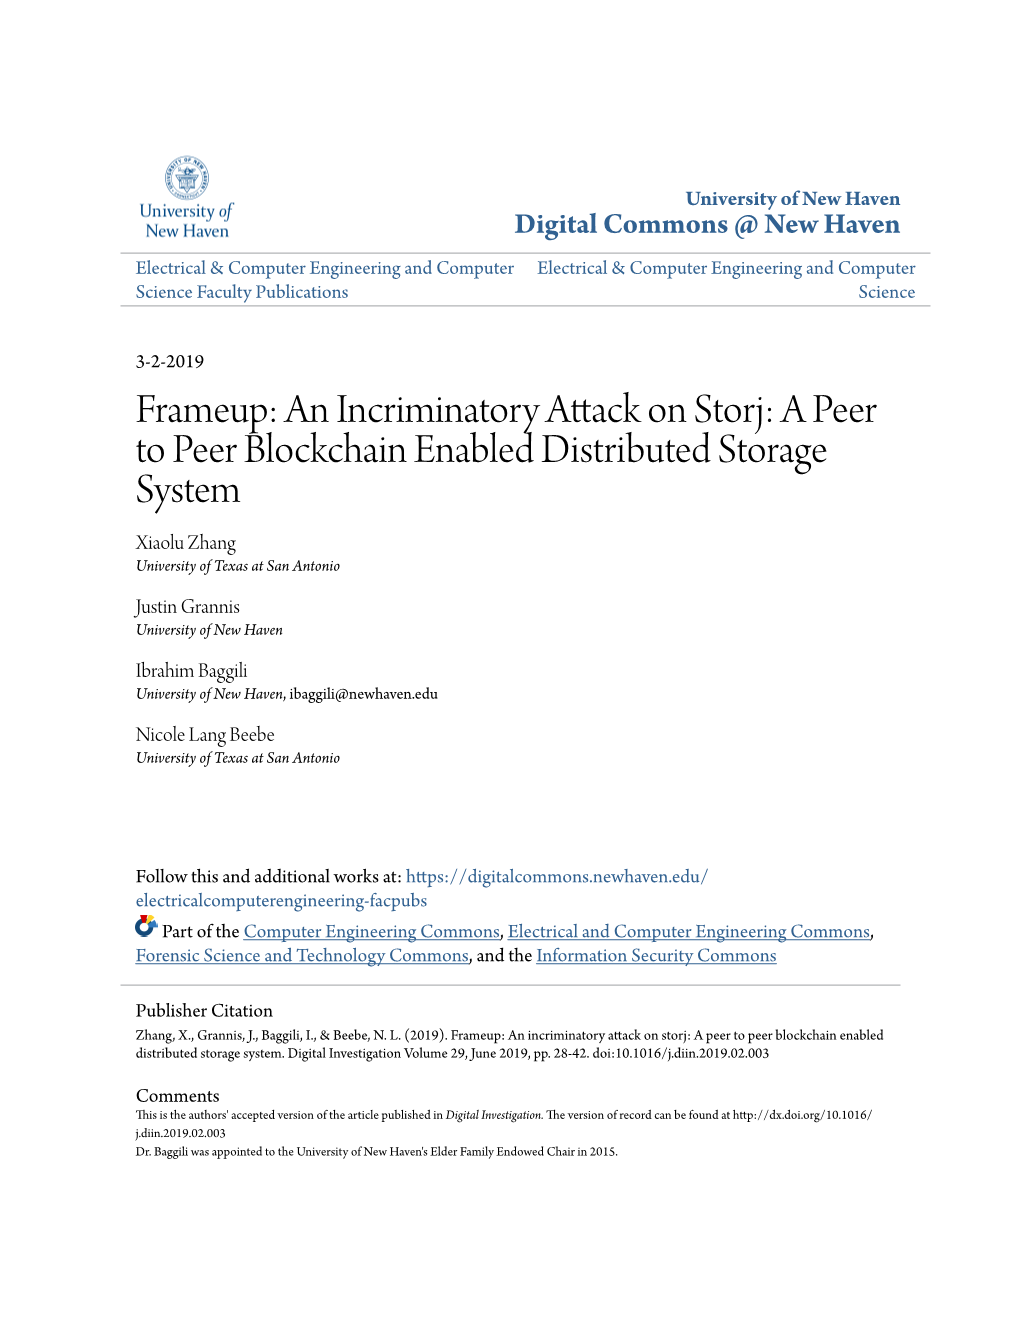 An Incriminatory Attack on Storj: a Peer to Peer Blockchain Enabled Distributed Storage System Xiaolu Zhang University of Texas at San Antonio